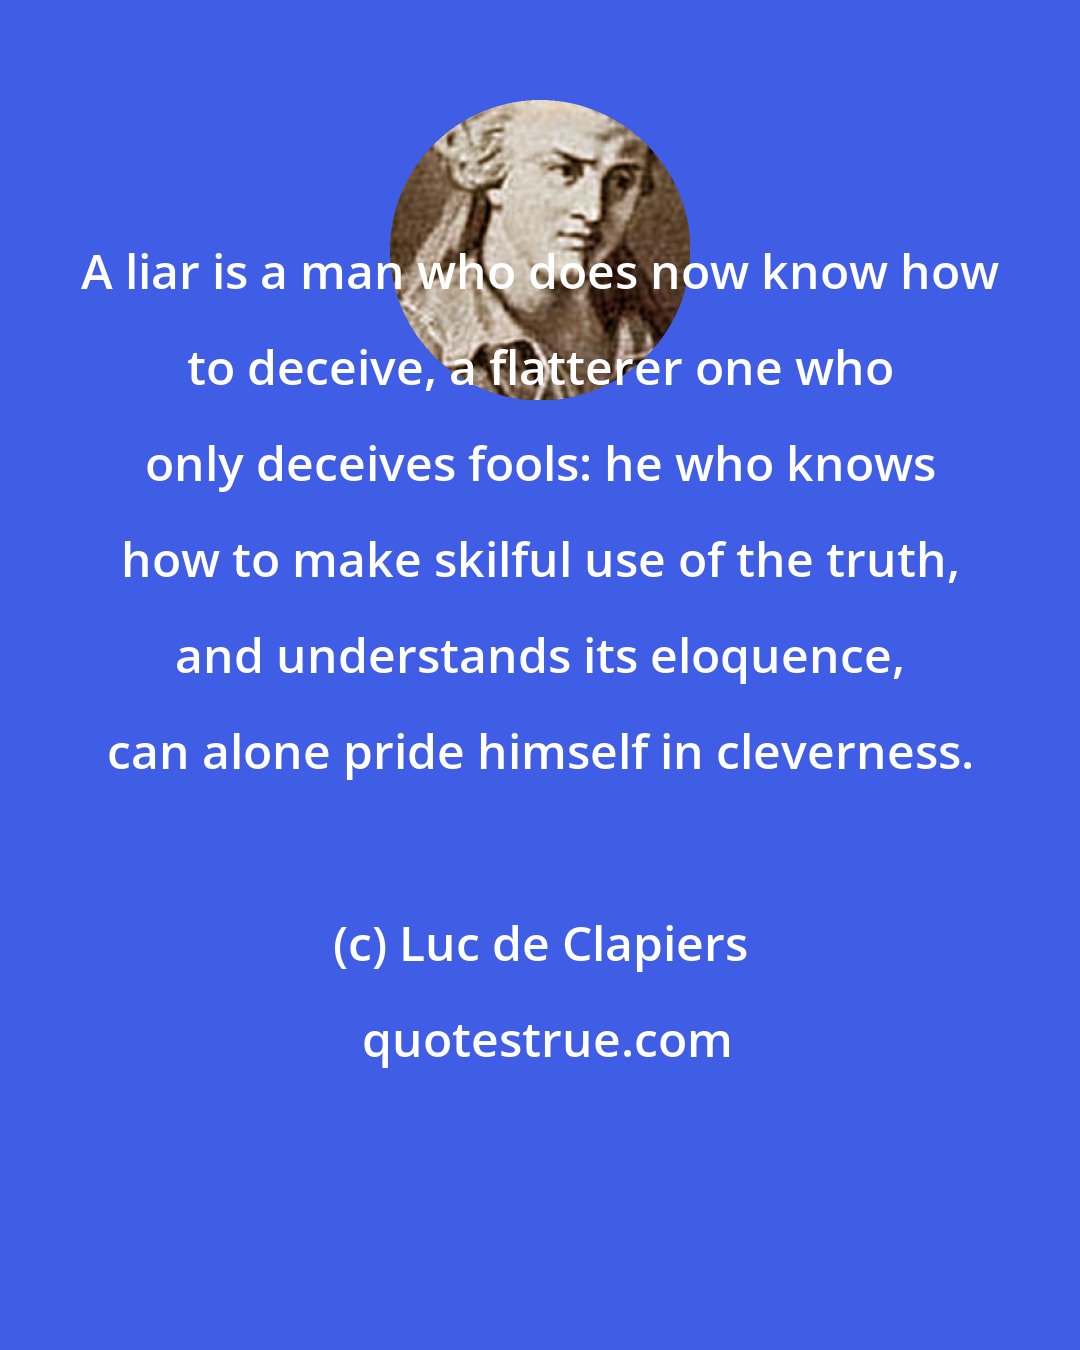 Luc de Clapiers: A liar is a man who does now know how to deceive, a flatterer one who only deceives fools: he who knows how to make skilful use of the truth, and understands its eloquence, can alone pride himself in cleverness.